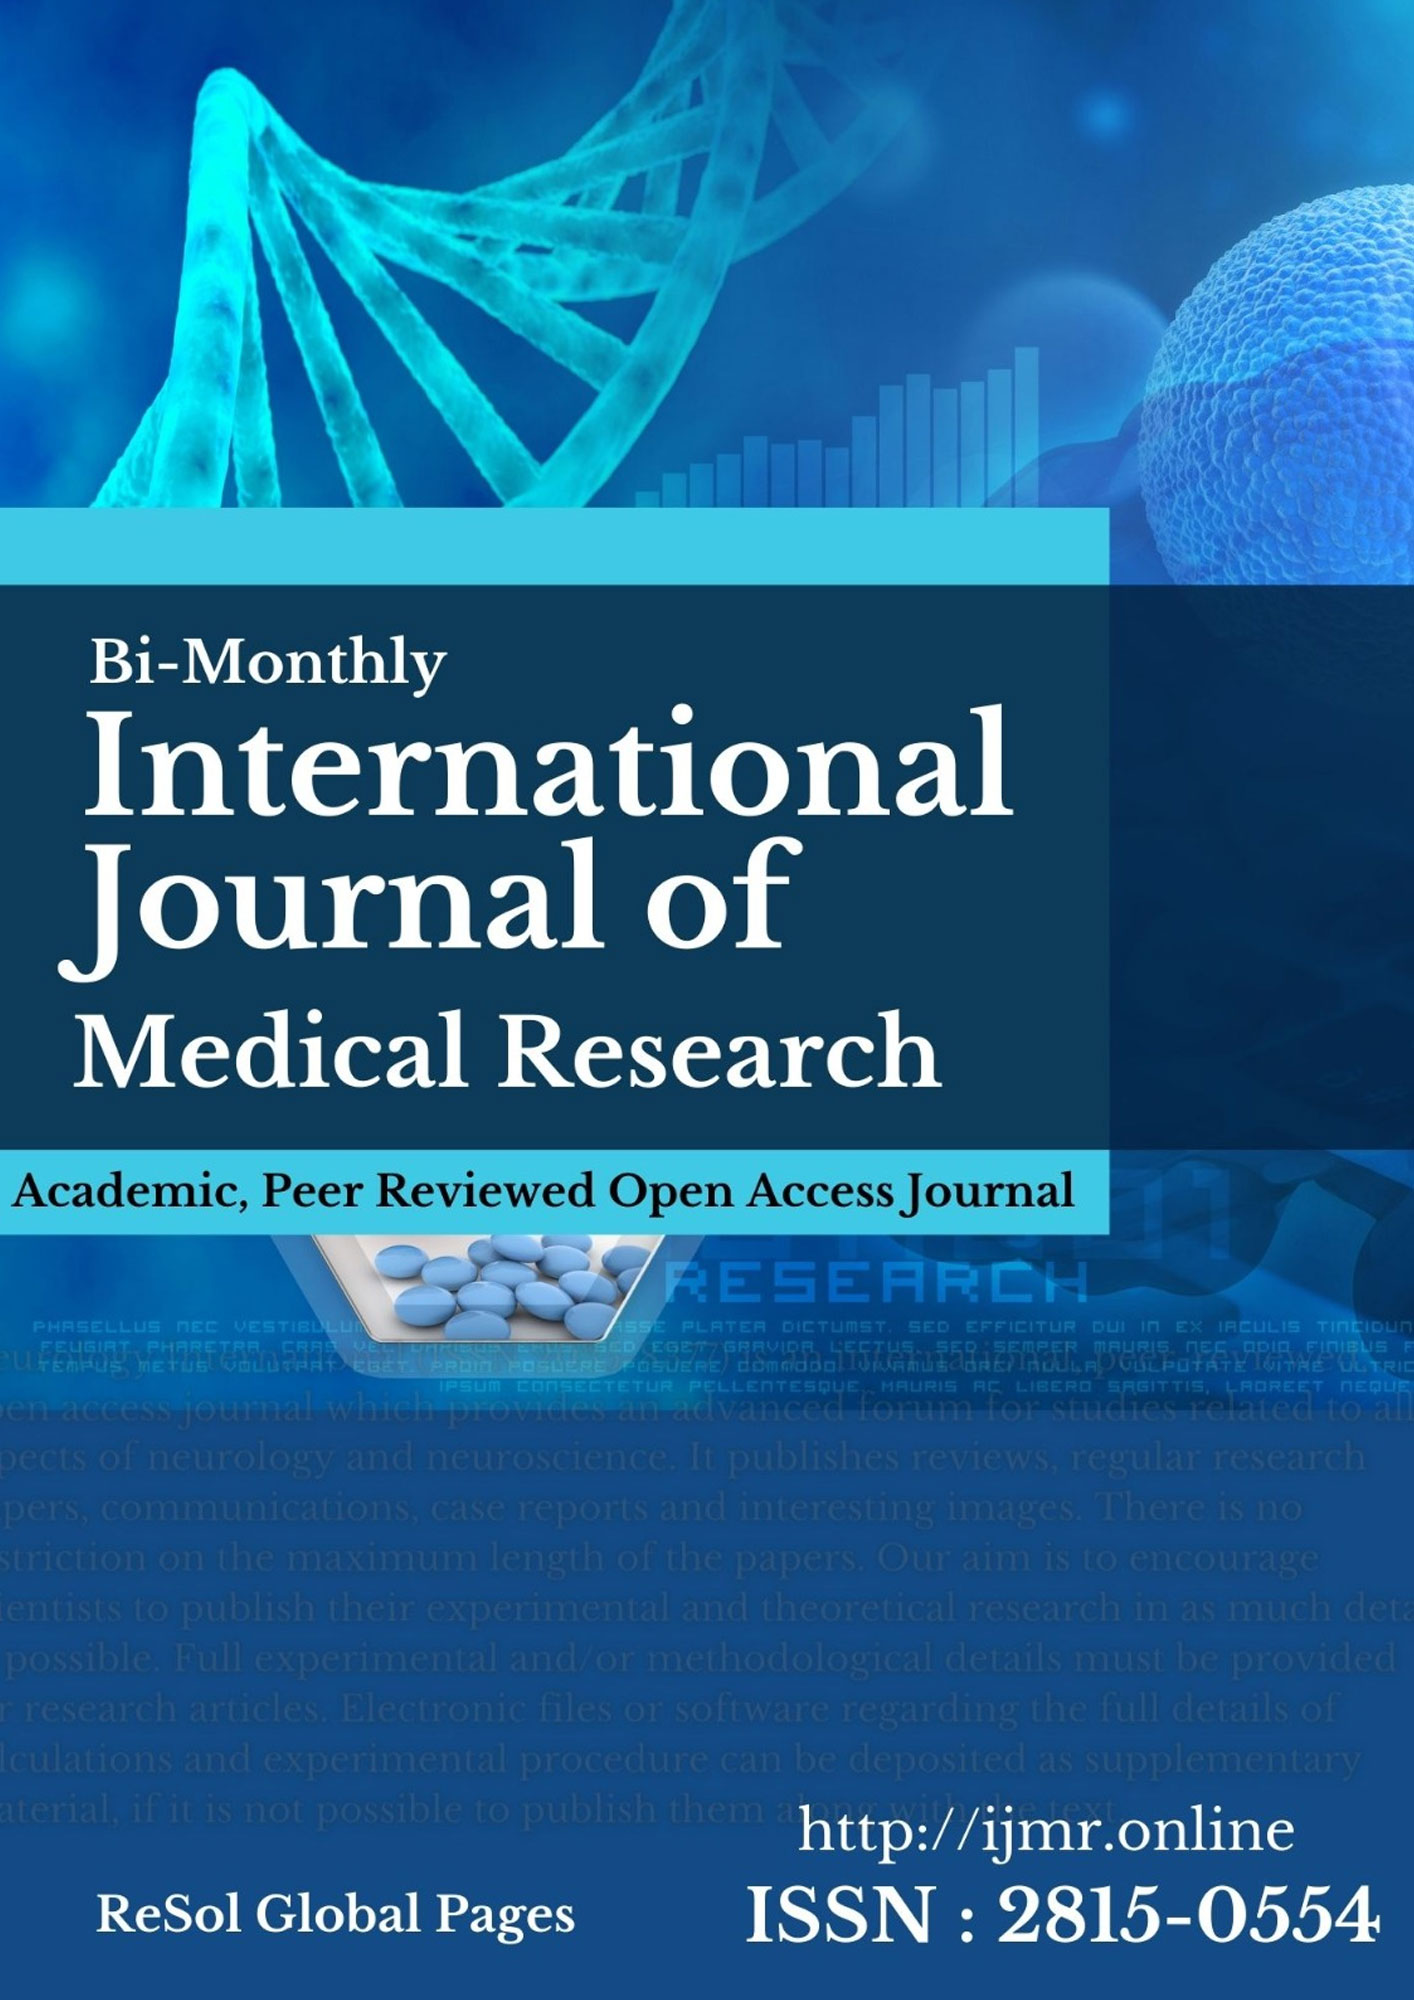 global journal of medical research quartile